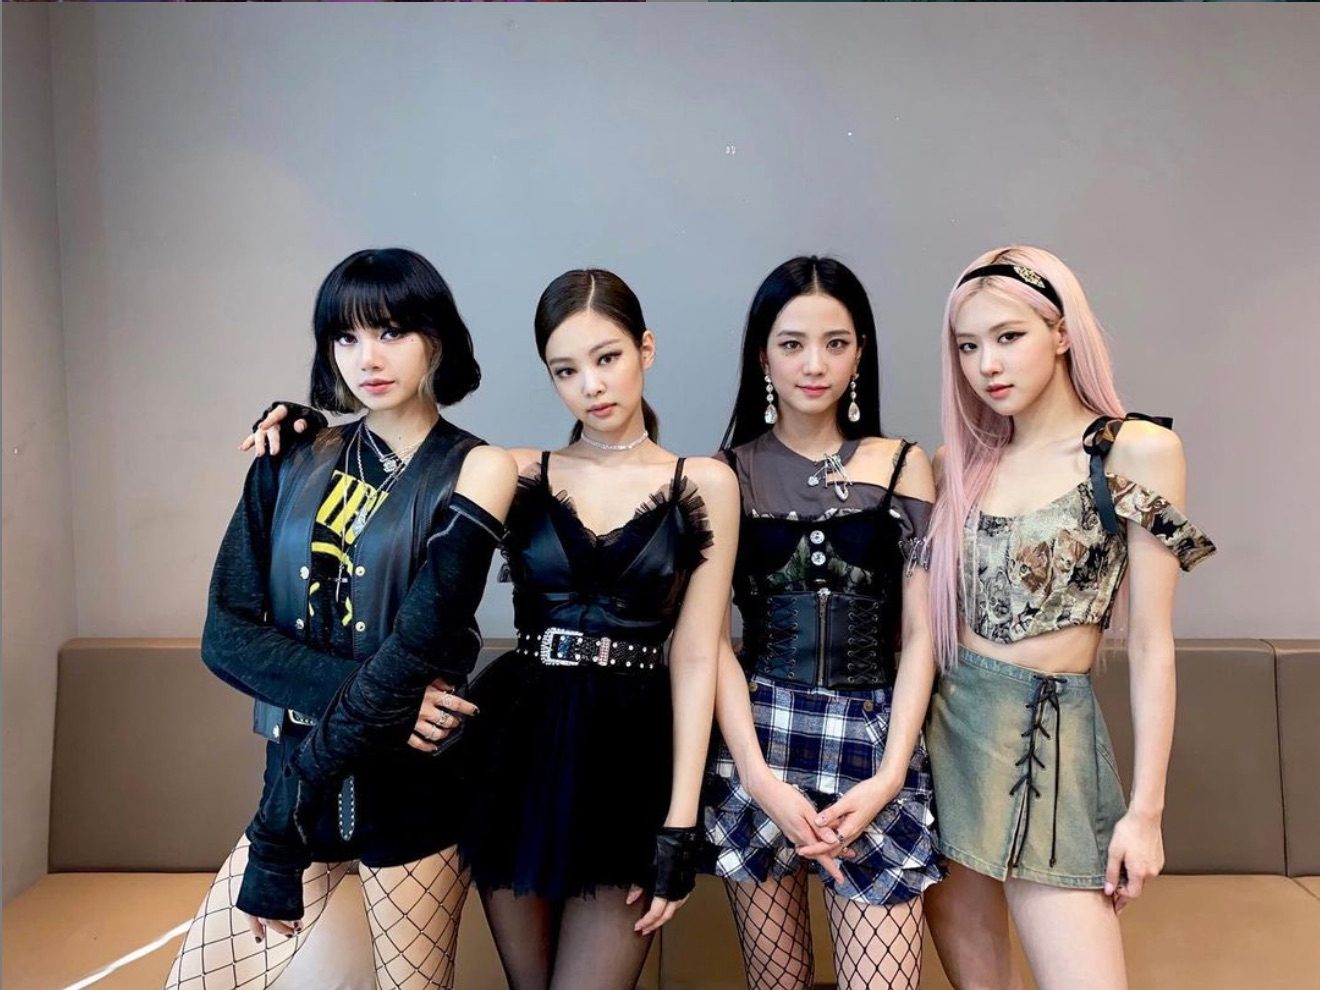 BLACKPINK is world’s biggest music act –Bloomberg ranking